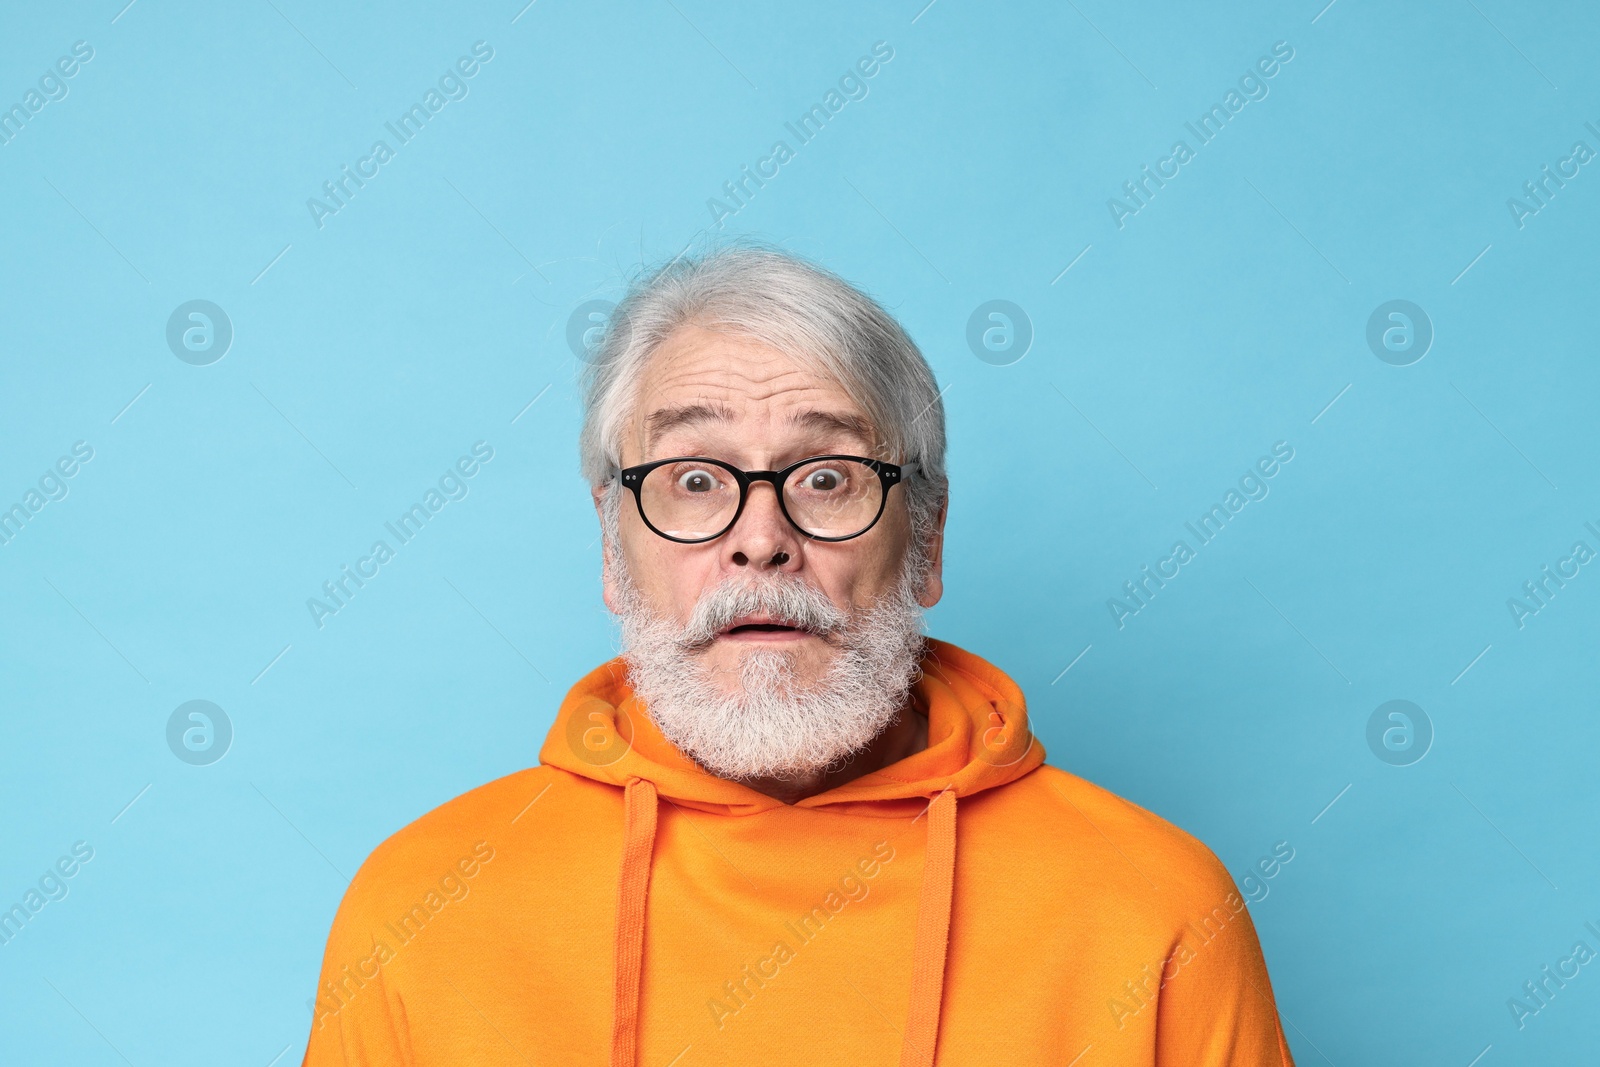 Photo of Senior man with mustache on light blue background